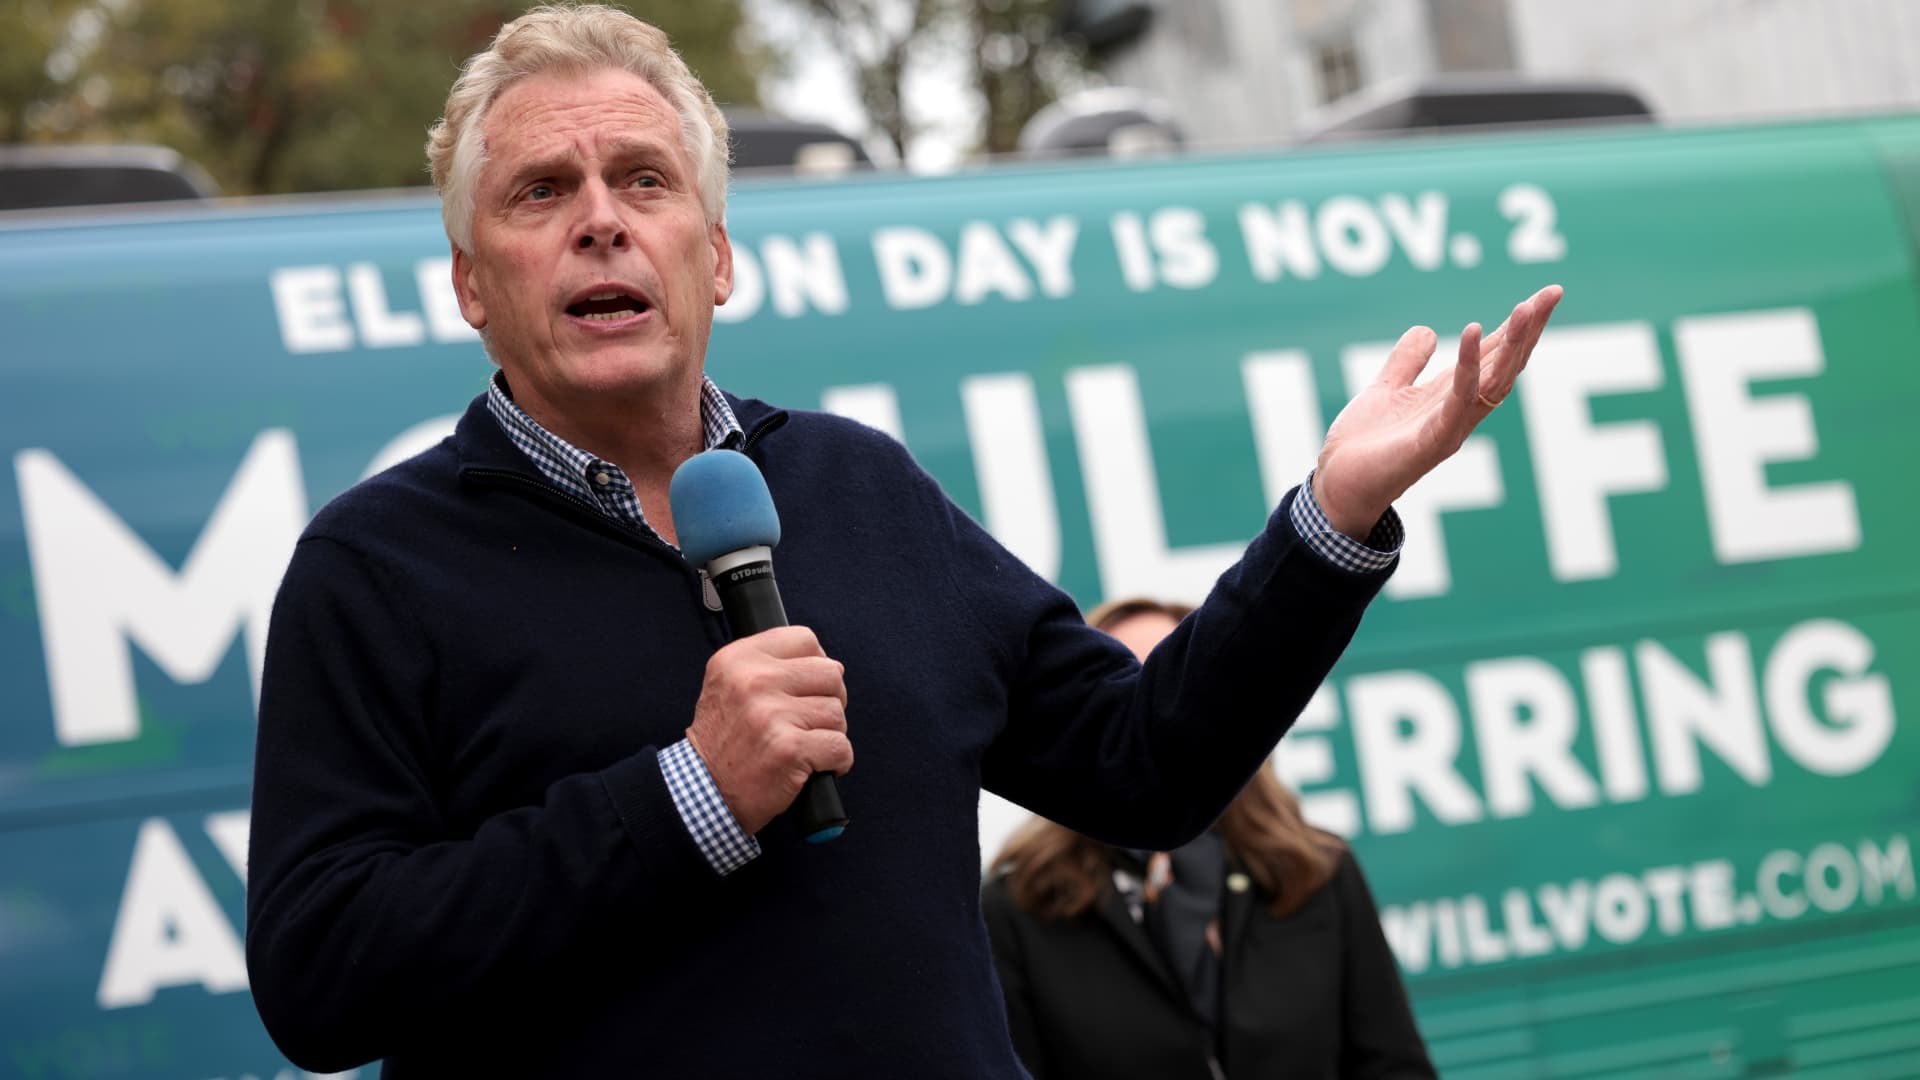 Democratic gubernatorial candidate, former Virginia Gov. Terry McAuliffe speaks to supporters at the Champion Brewing Company during a campaign event October 28, 2021 in Charlottesville, Virginia.